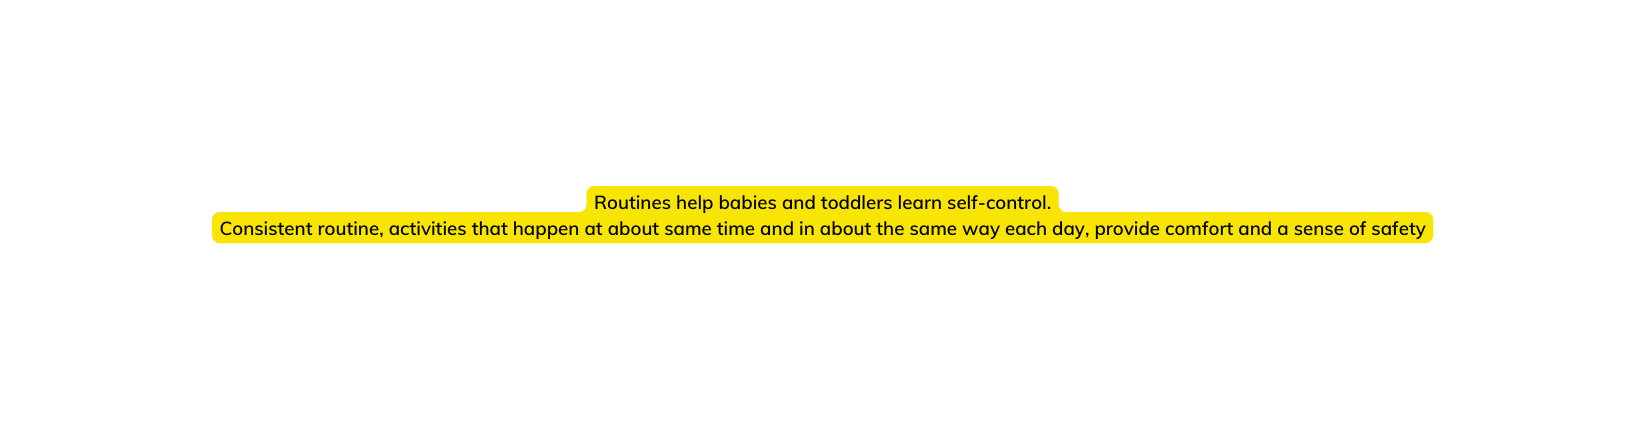 Routines help babies and toddlers learn self control Consistent routine activities that happen at about same time and in about the same way each day provide comfort and a sense of safety